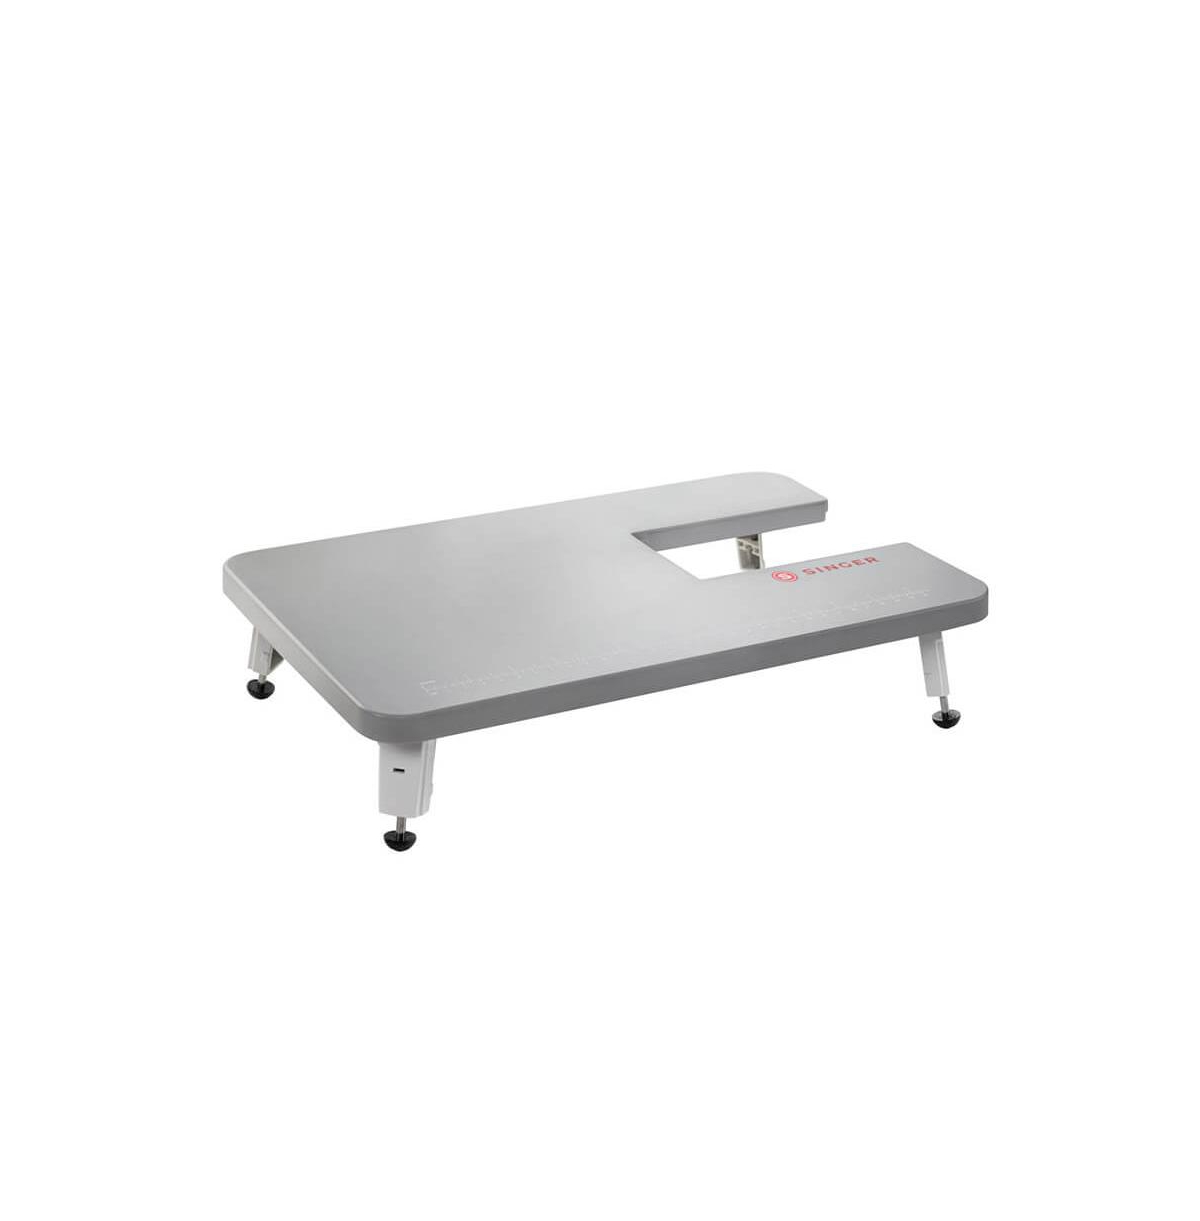 Heavy Duty Extension Table for Mechanical Hd Machines - Grey